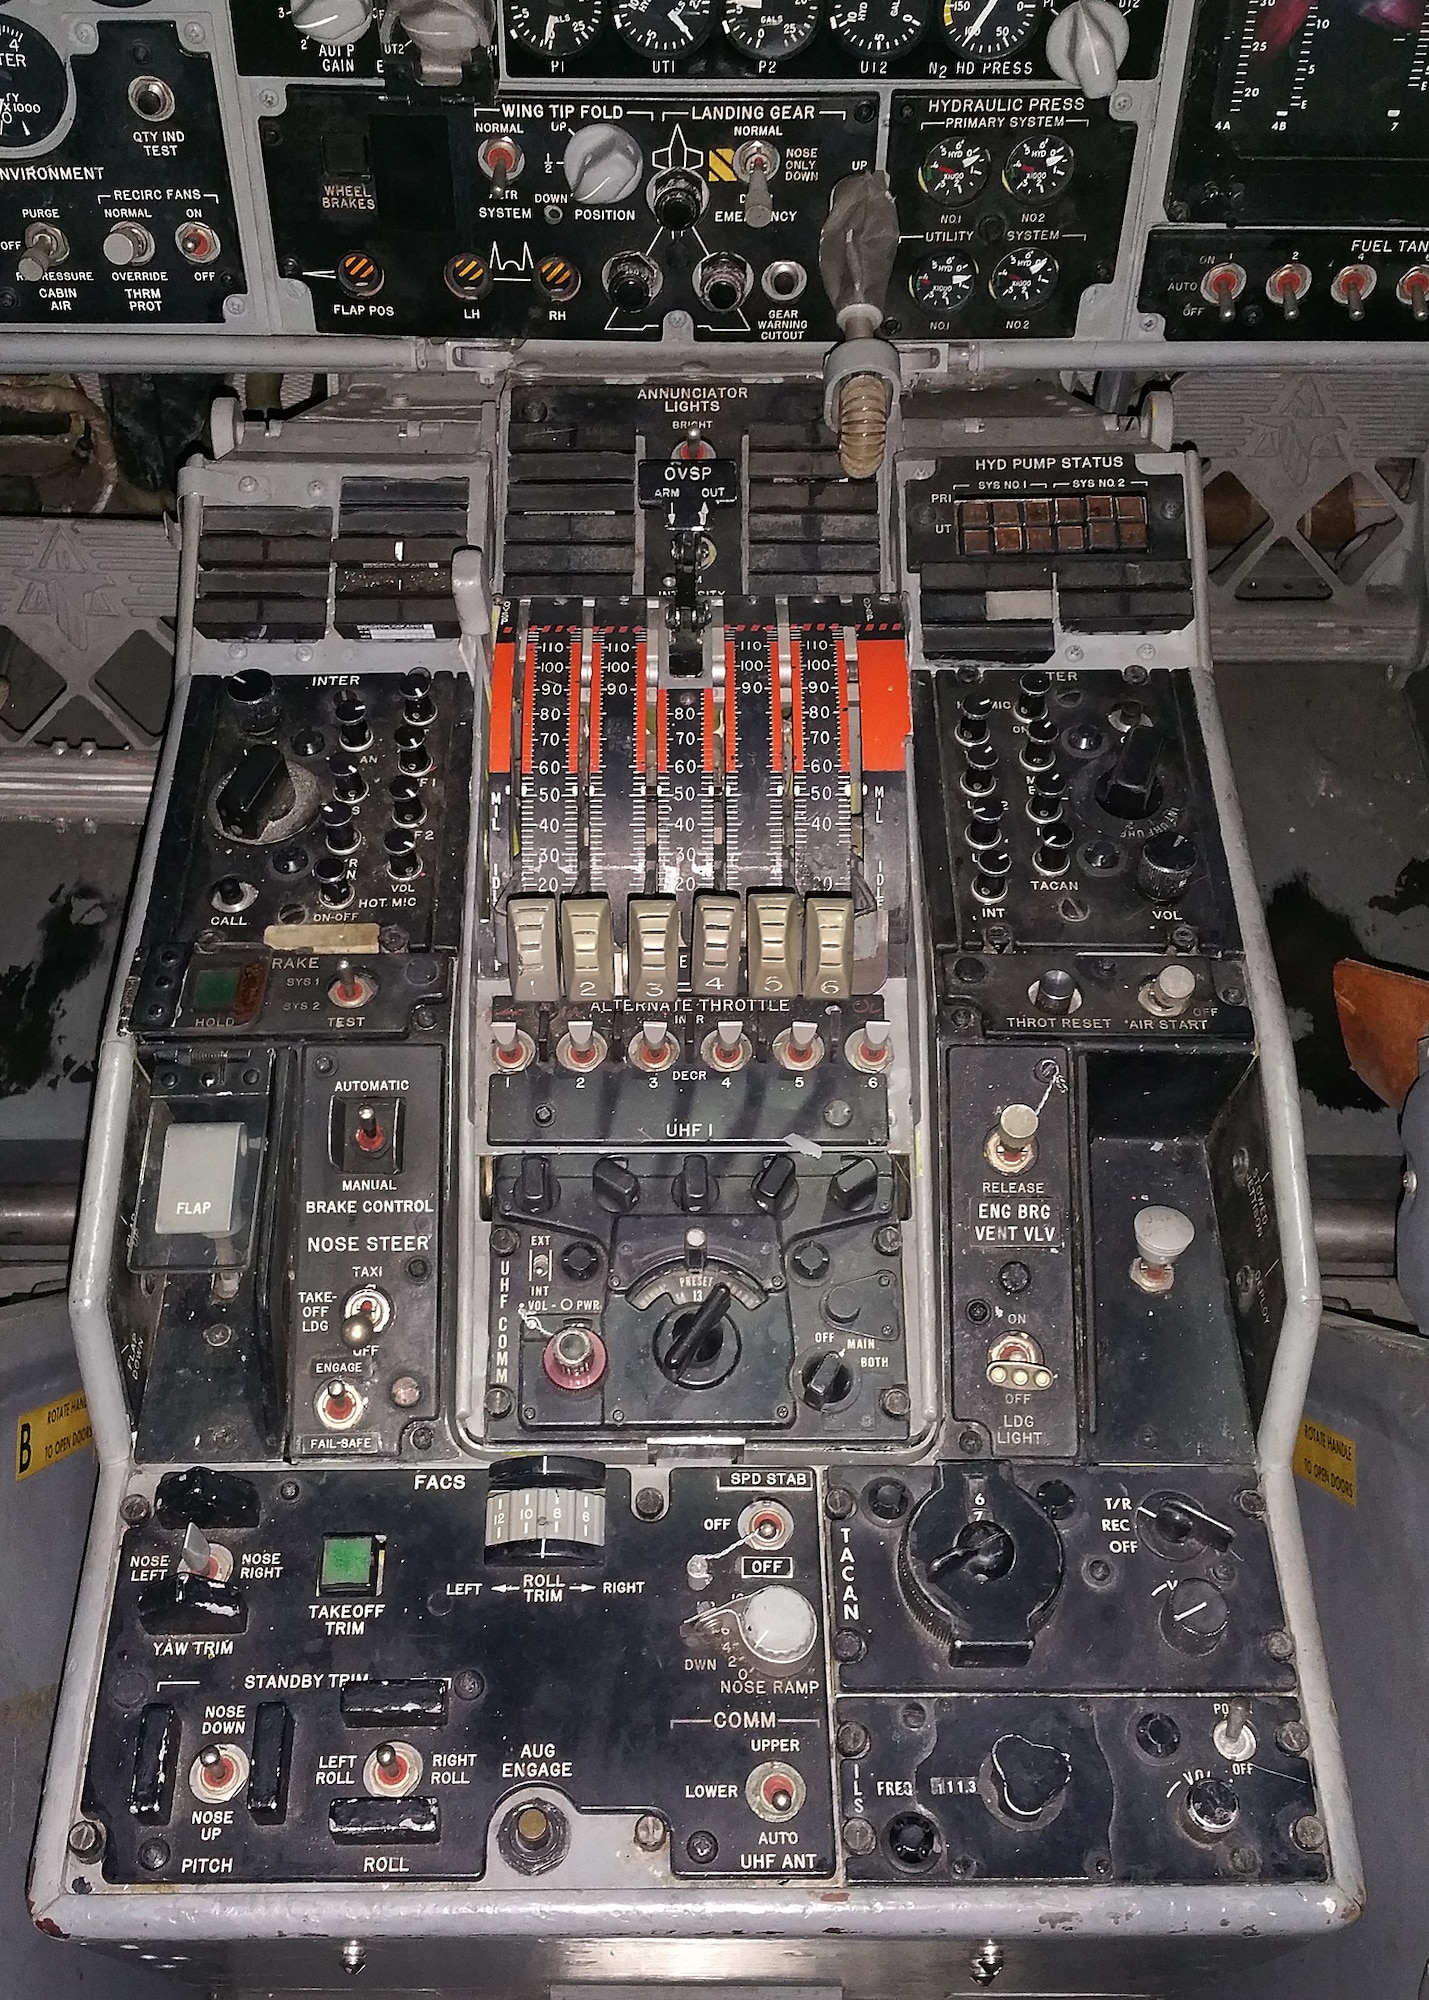 DAYTON, Ohio - North American XB-70 cockpit at the National Museum of the U.S. Air Force. (U.S. Air Force photo by Ken LaRock)